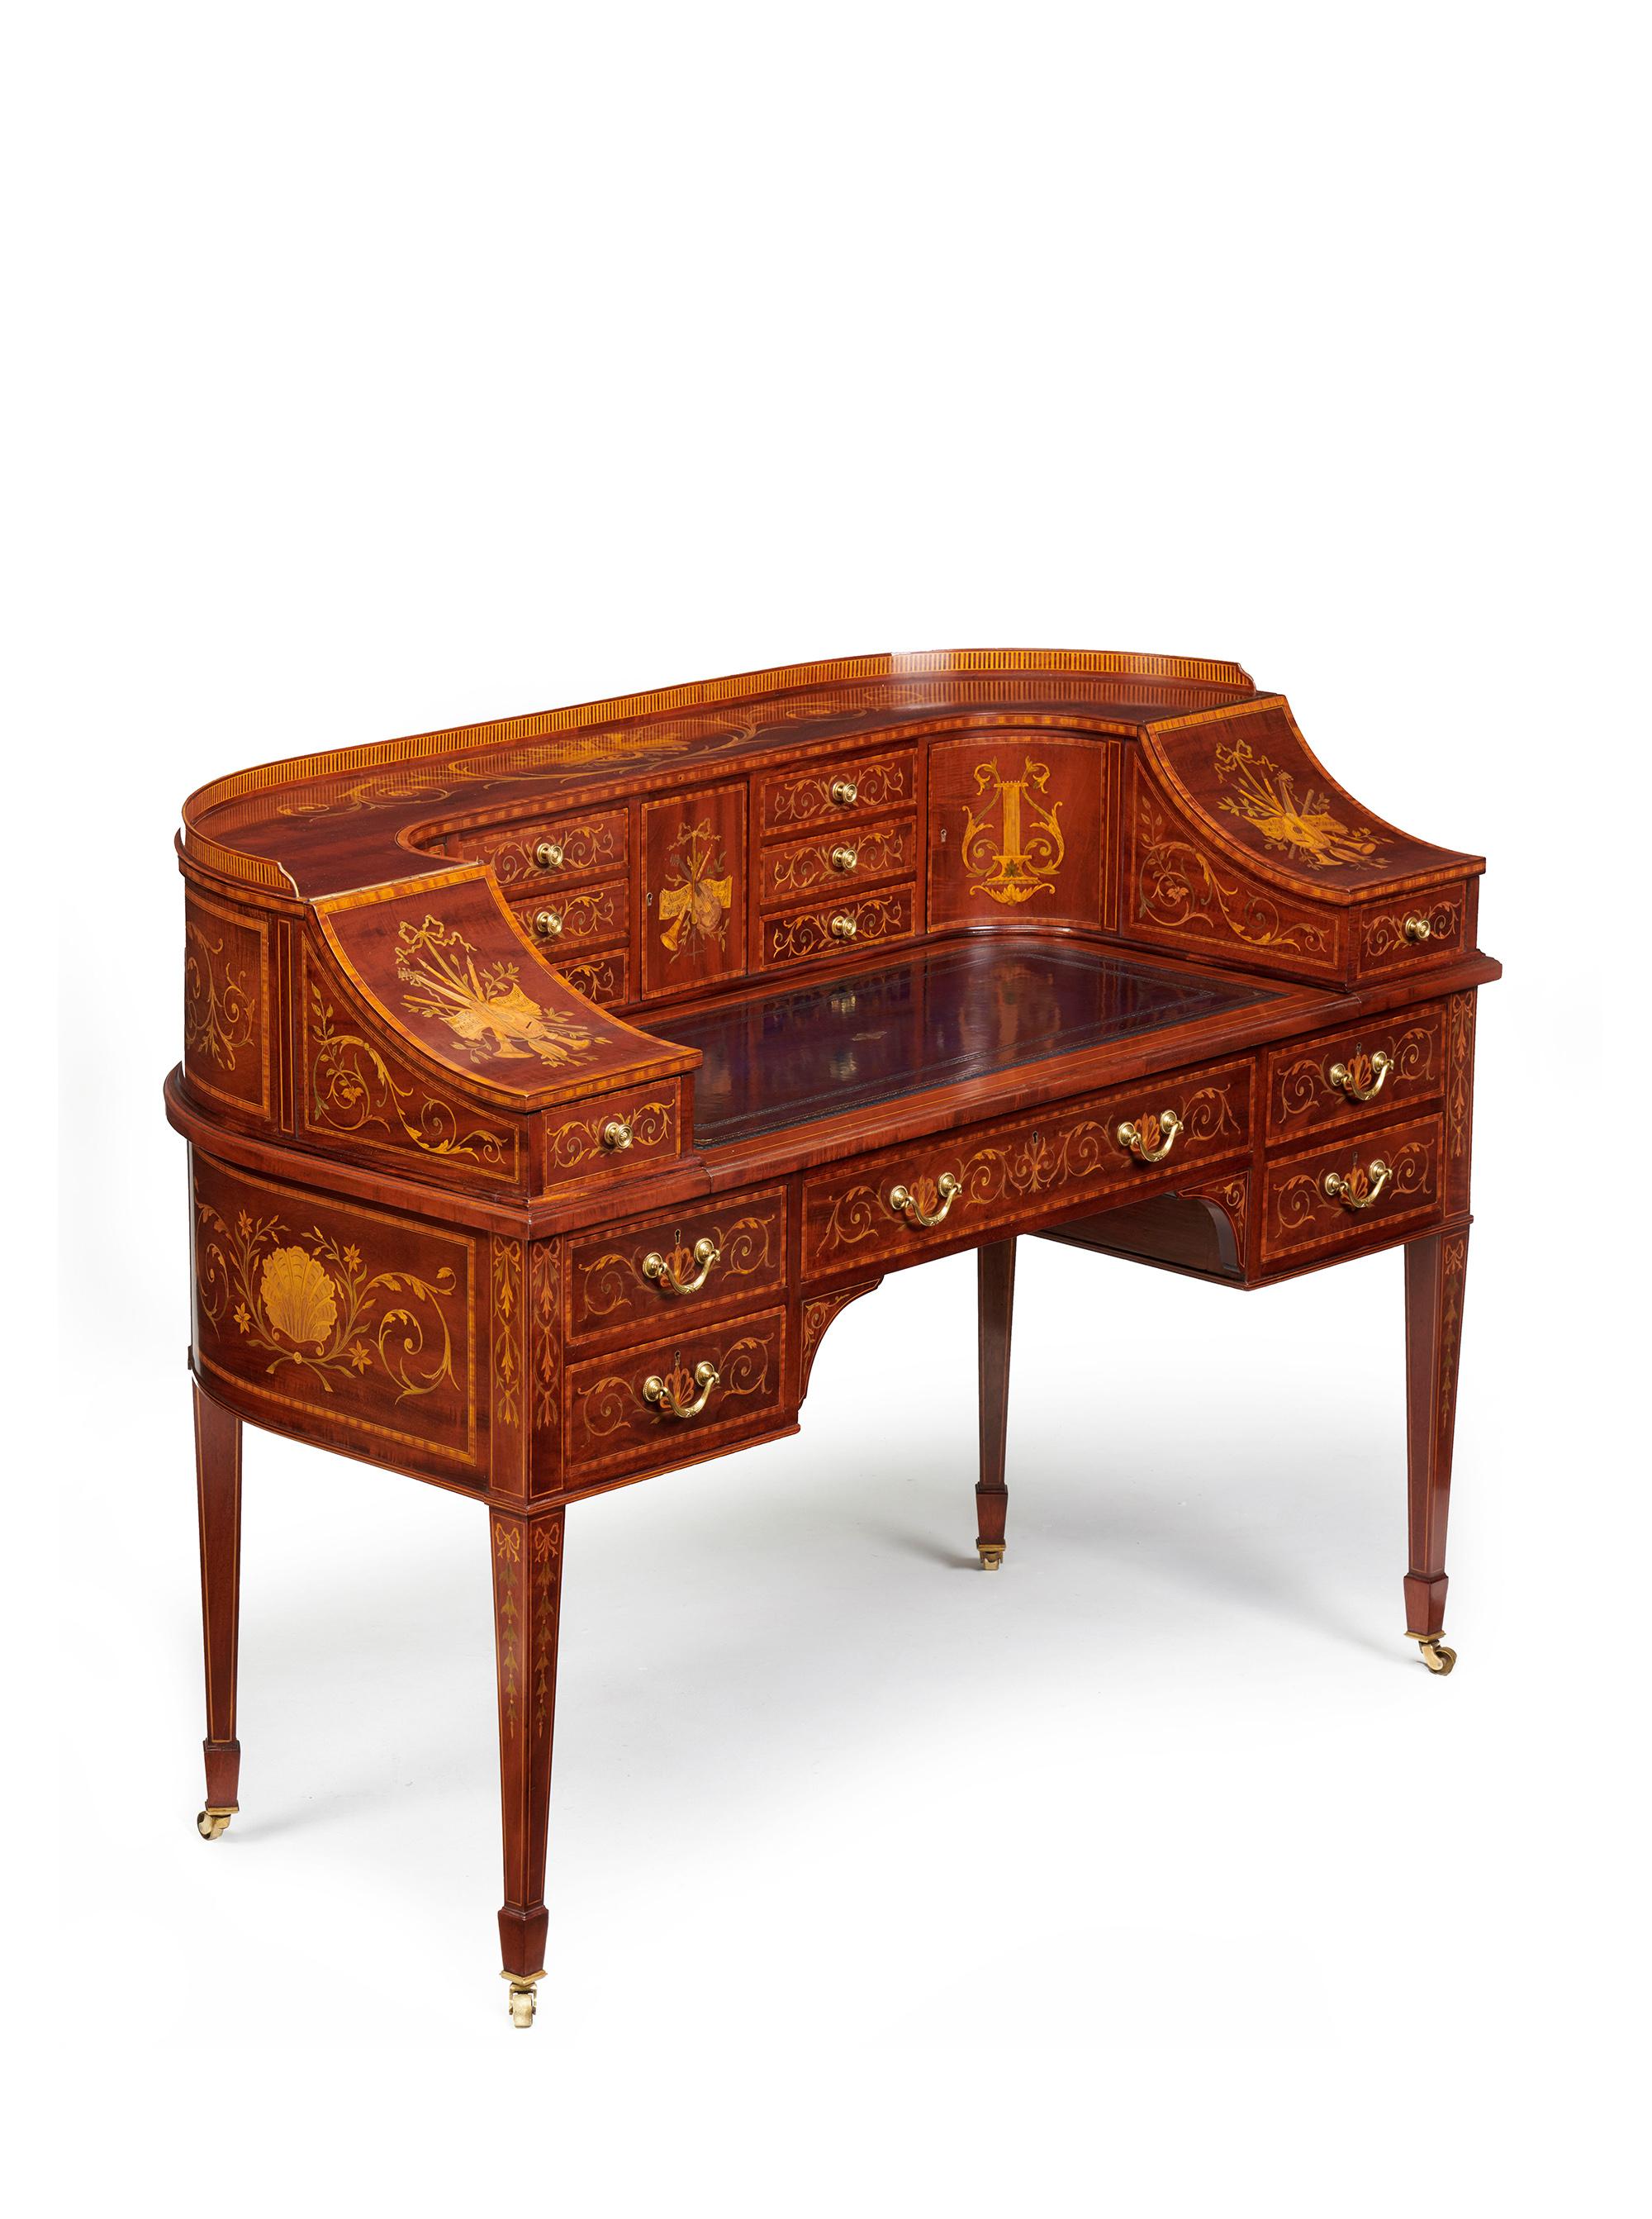 An Exhibition quality mahogany, satinwood and marquetry inlaid 19th century Carlton House Desk made by the renowned London firm and suppliers to Royalty, Maple & Co. Stamped to the central drawer.

English, London made, circa 1880-1900.

Of